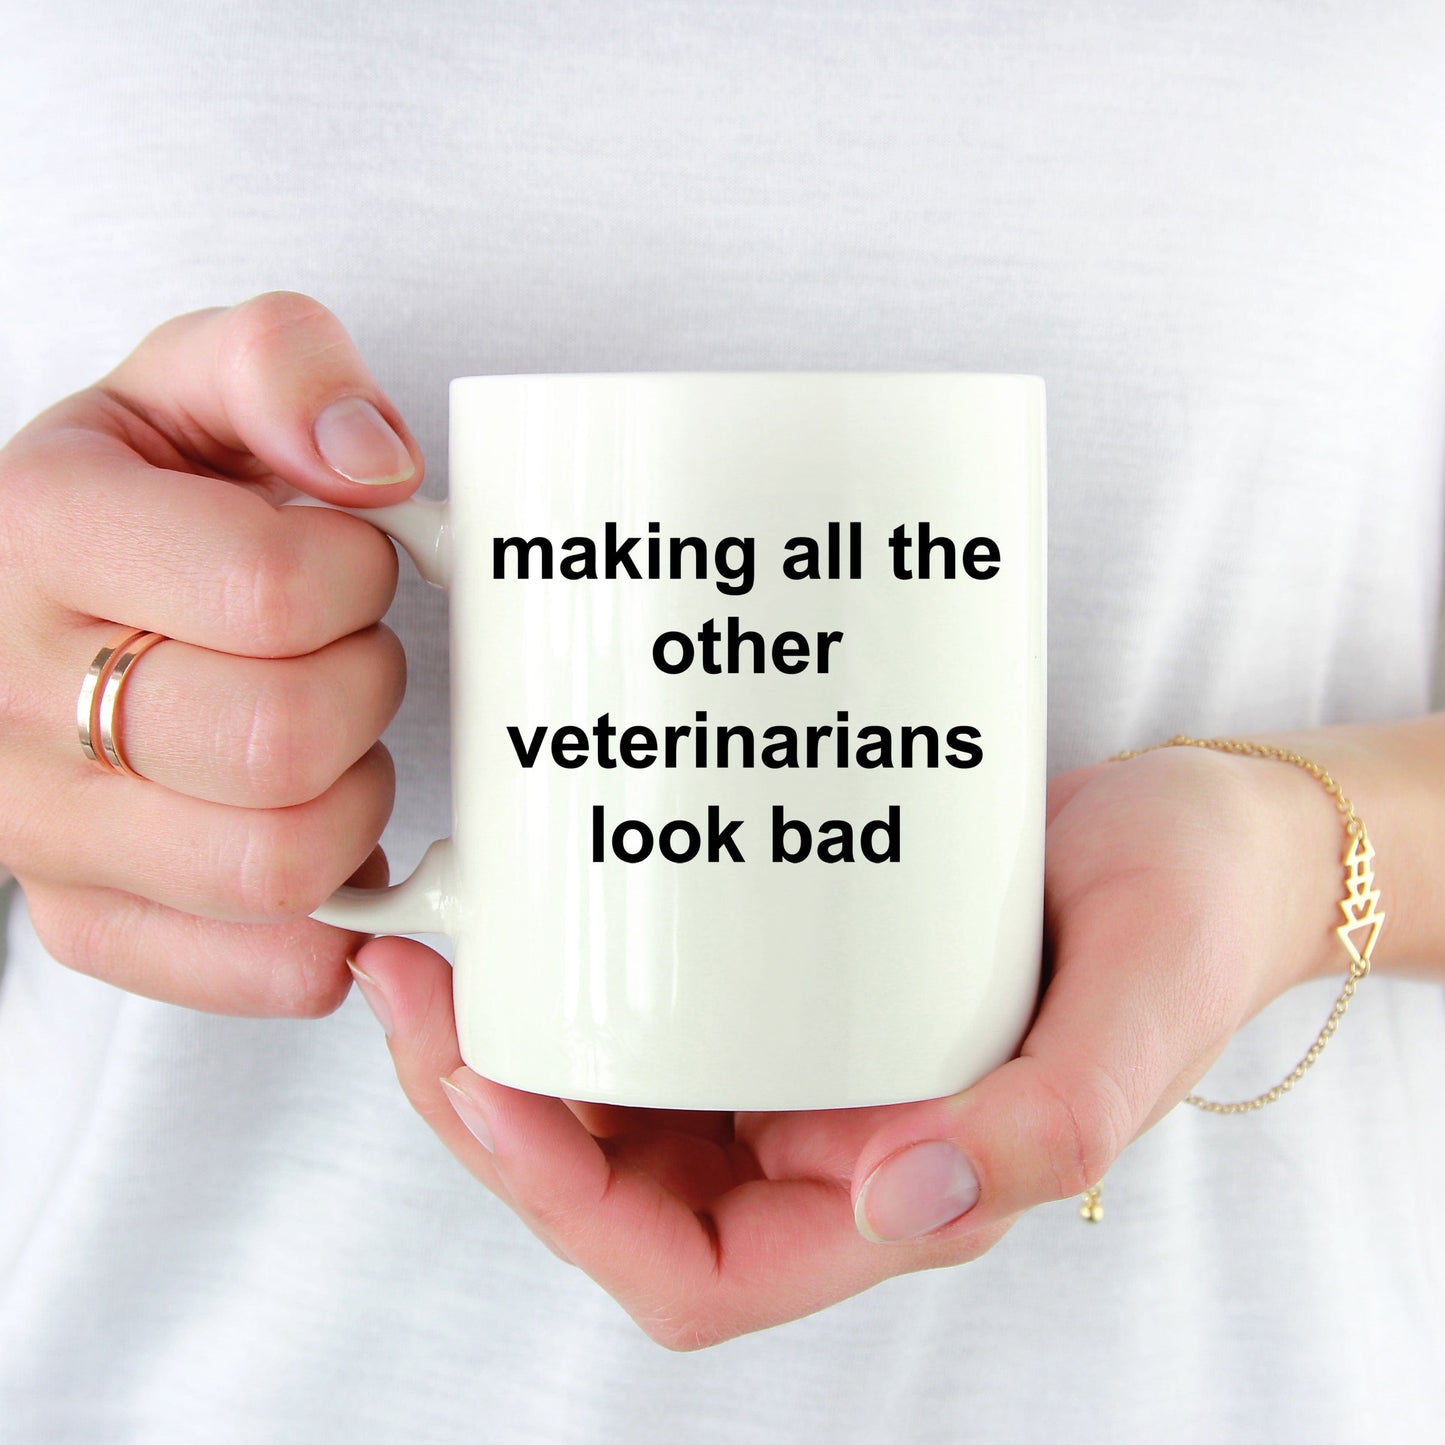 Making All the Other Veterinarians Look Bad Funny Coffee Mug